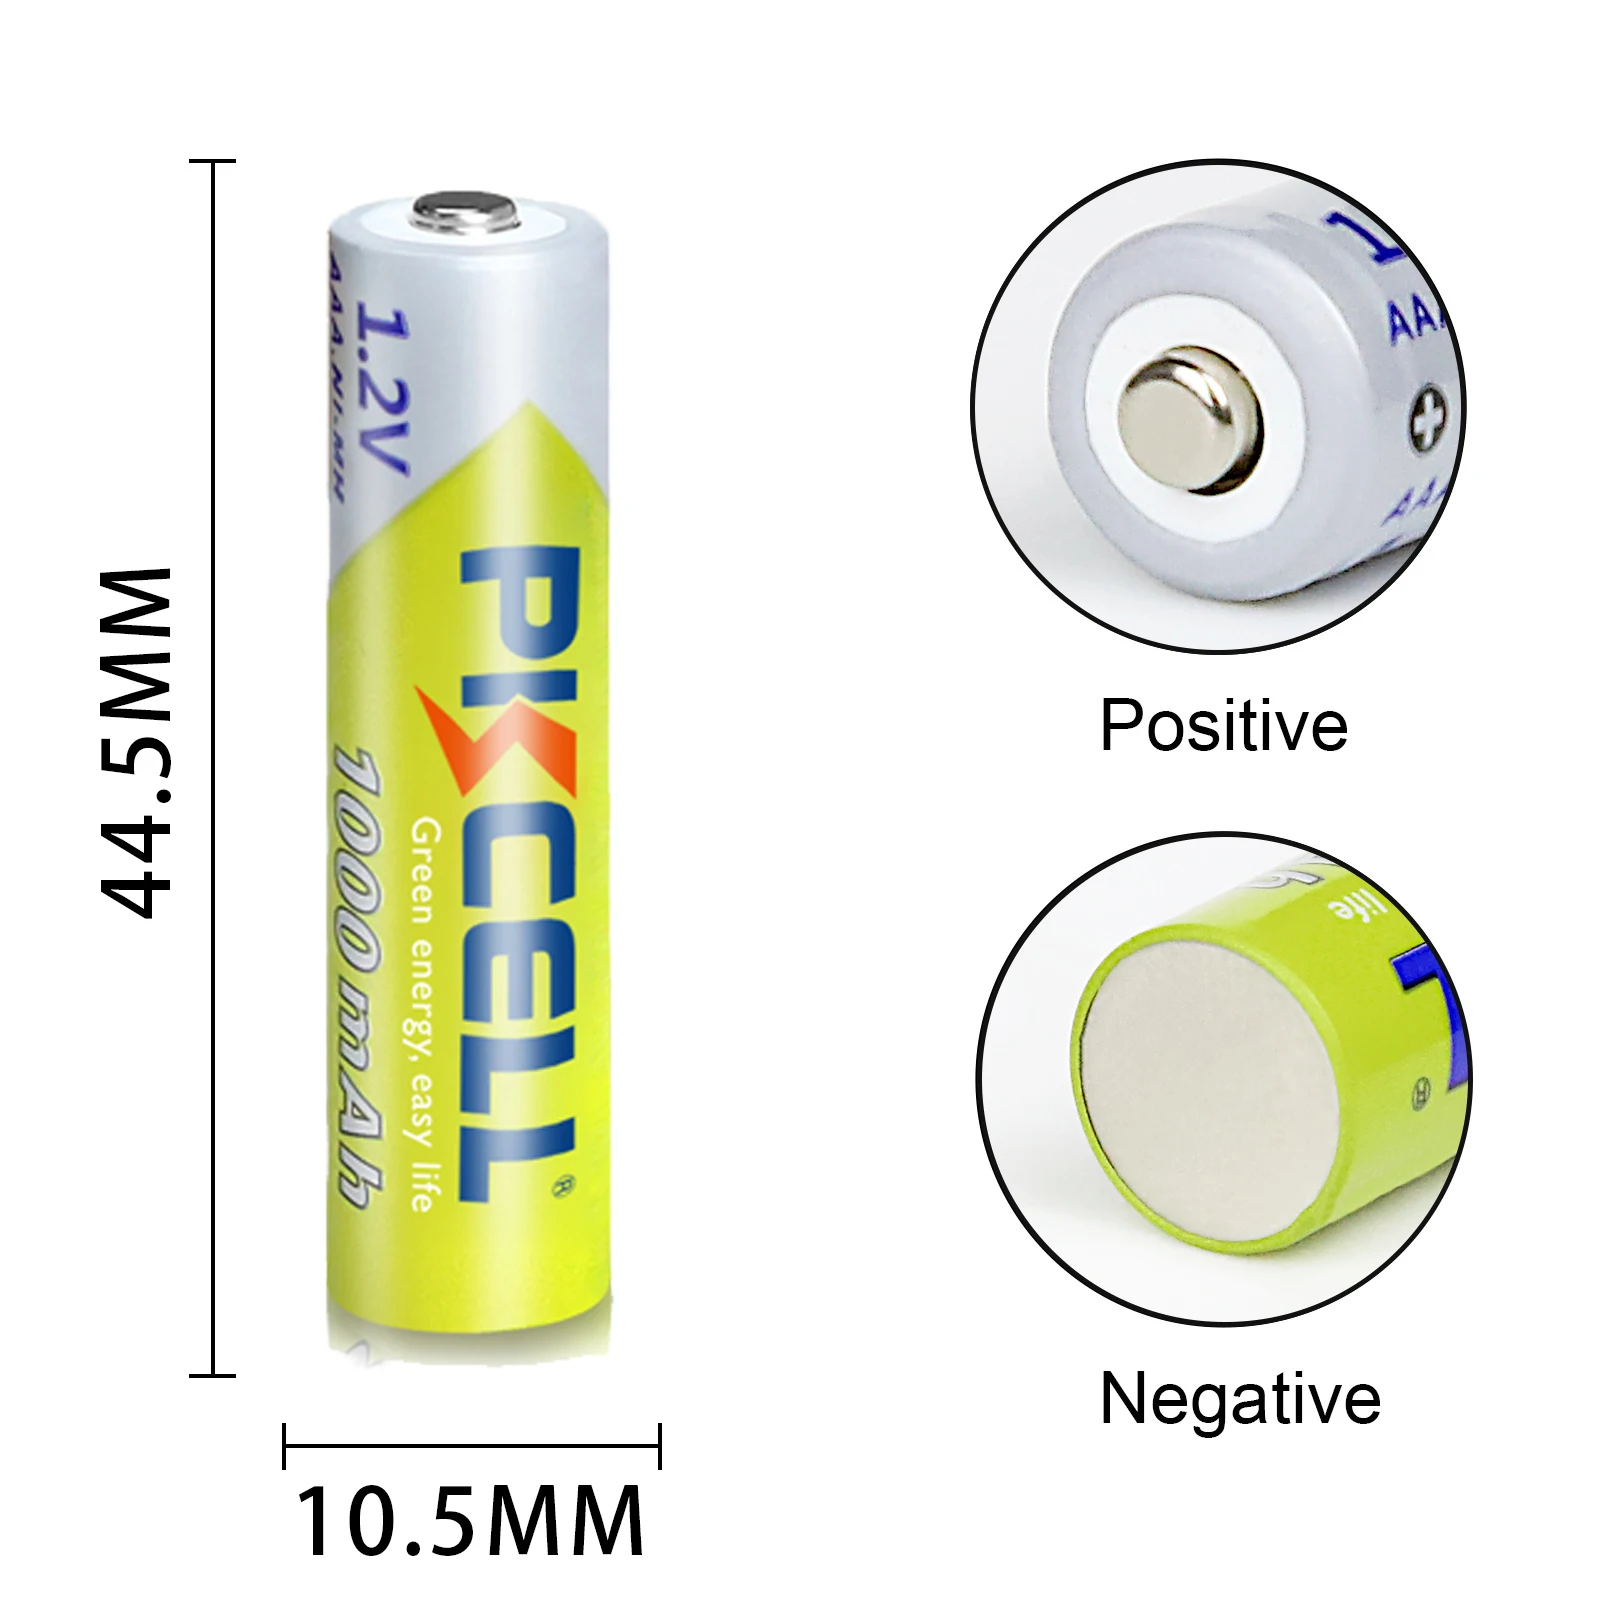 8Pcs PKCELL AAA Battery 1.2V Ni-MH AAA Rechargeable Batteries 1000MAH 3A aaa flashlight battery with 2PC AAA/AA Battery Holder 5